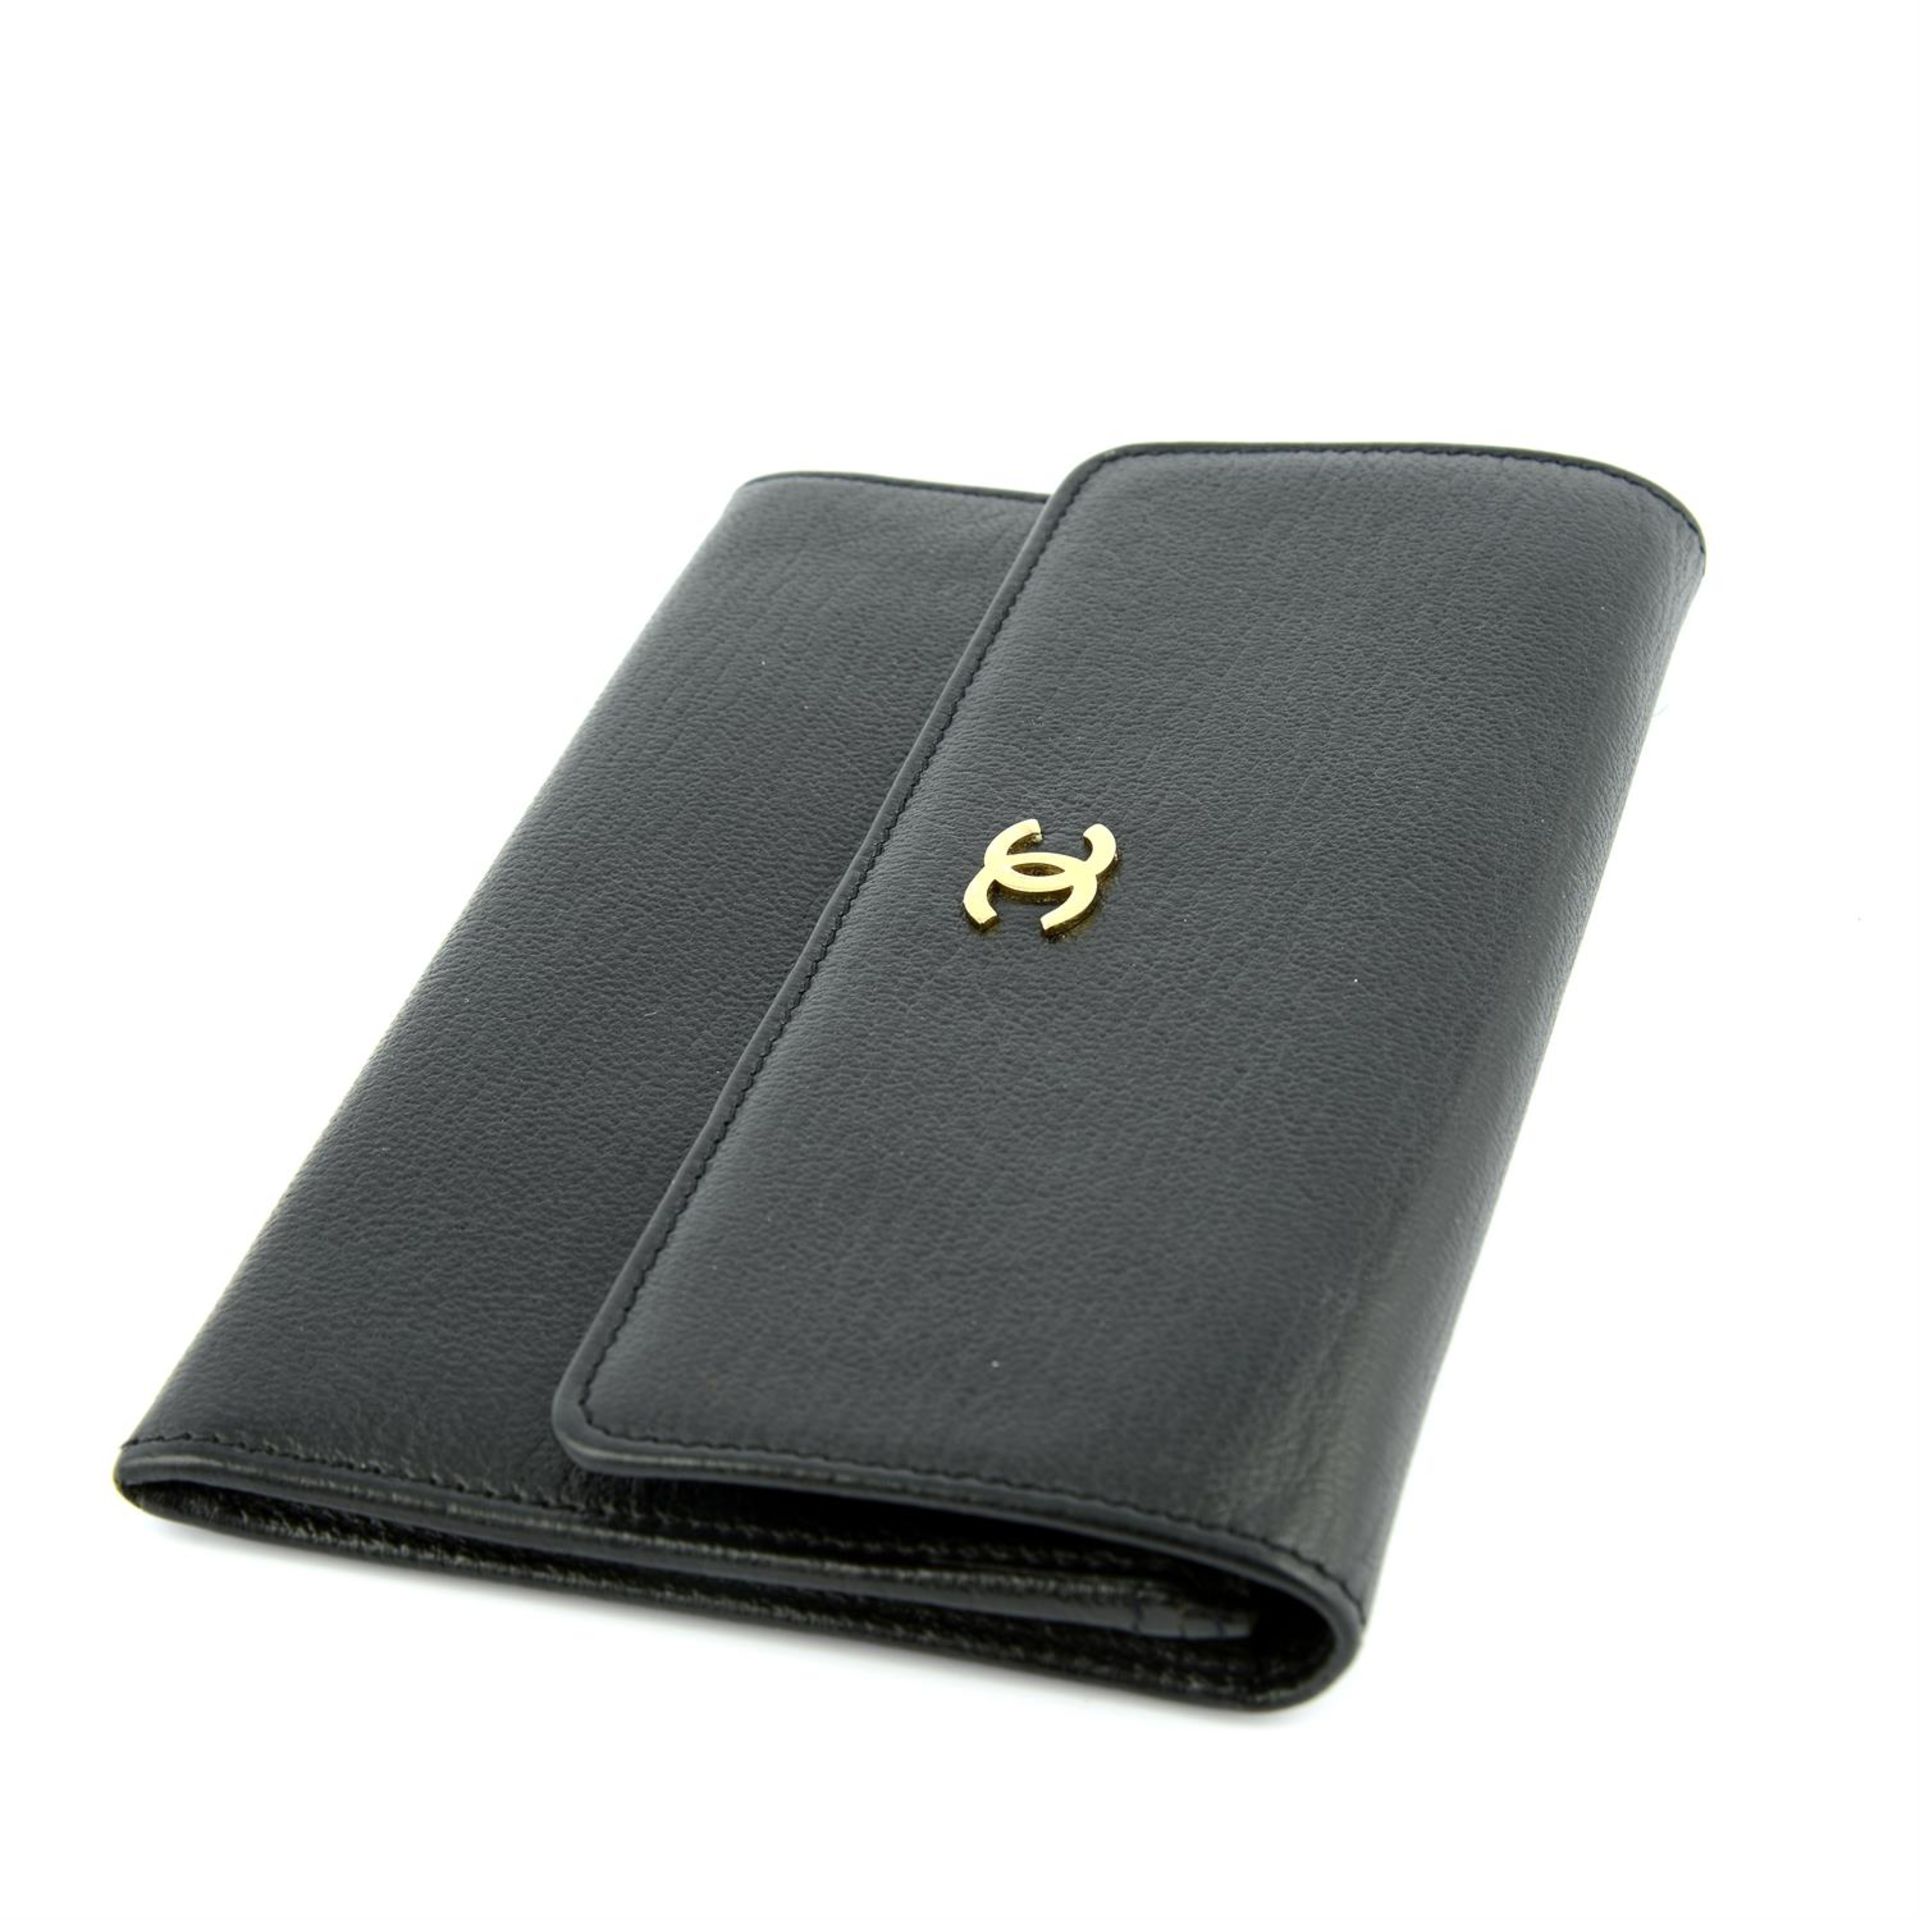 CHANEL - a compact flap wallet. - Image 3 of 4